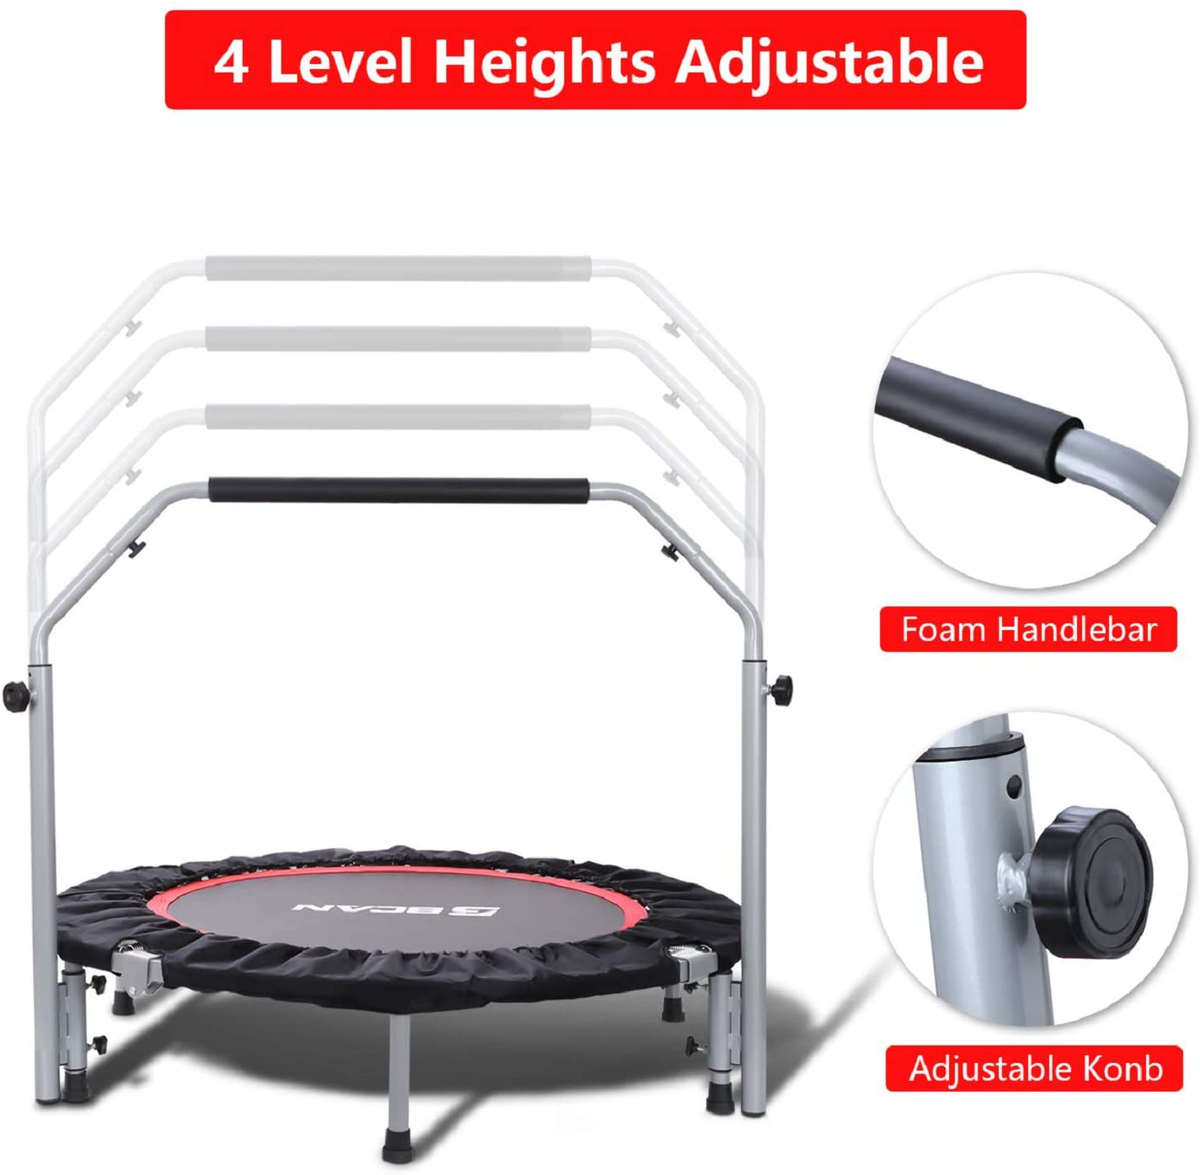 BCAN 40/48 Foldable Mini Trampoline Max Load 330lbs/440lbs, Fitness  Rebounder with Adjustable Foam Handle, Exercise Trampoline for Adults